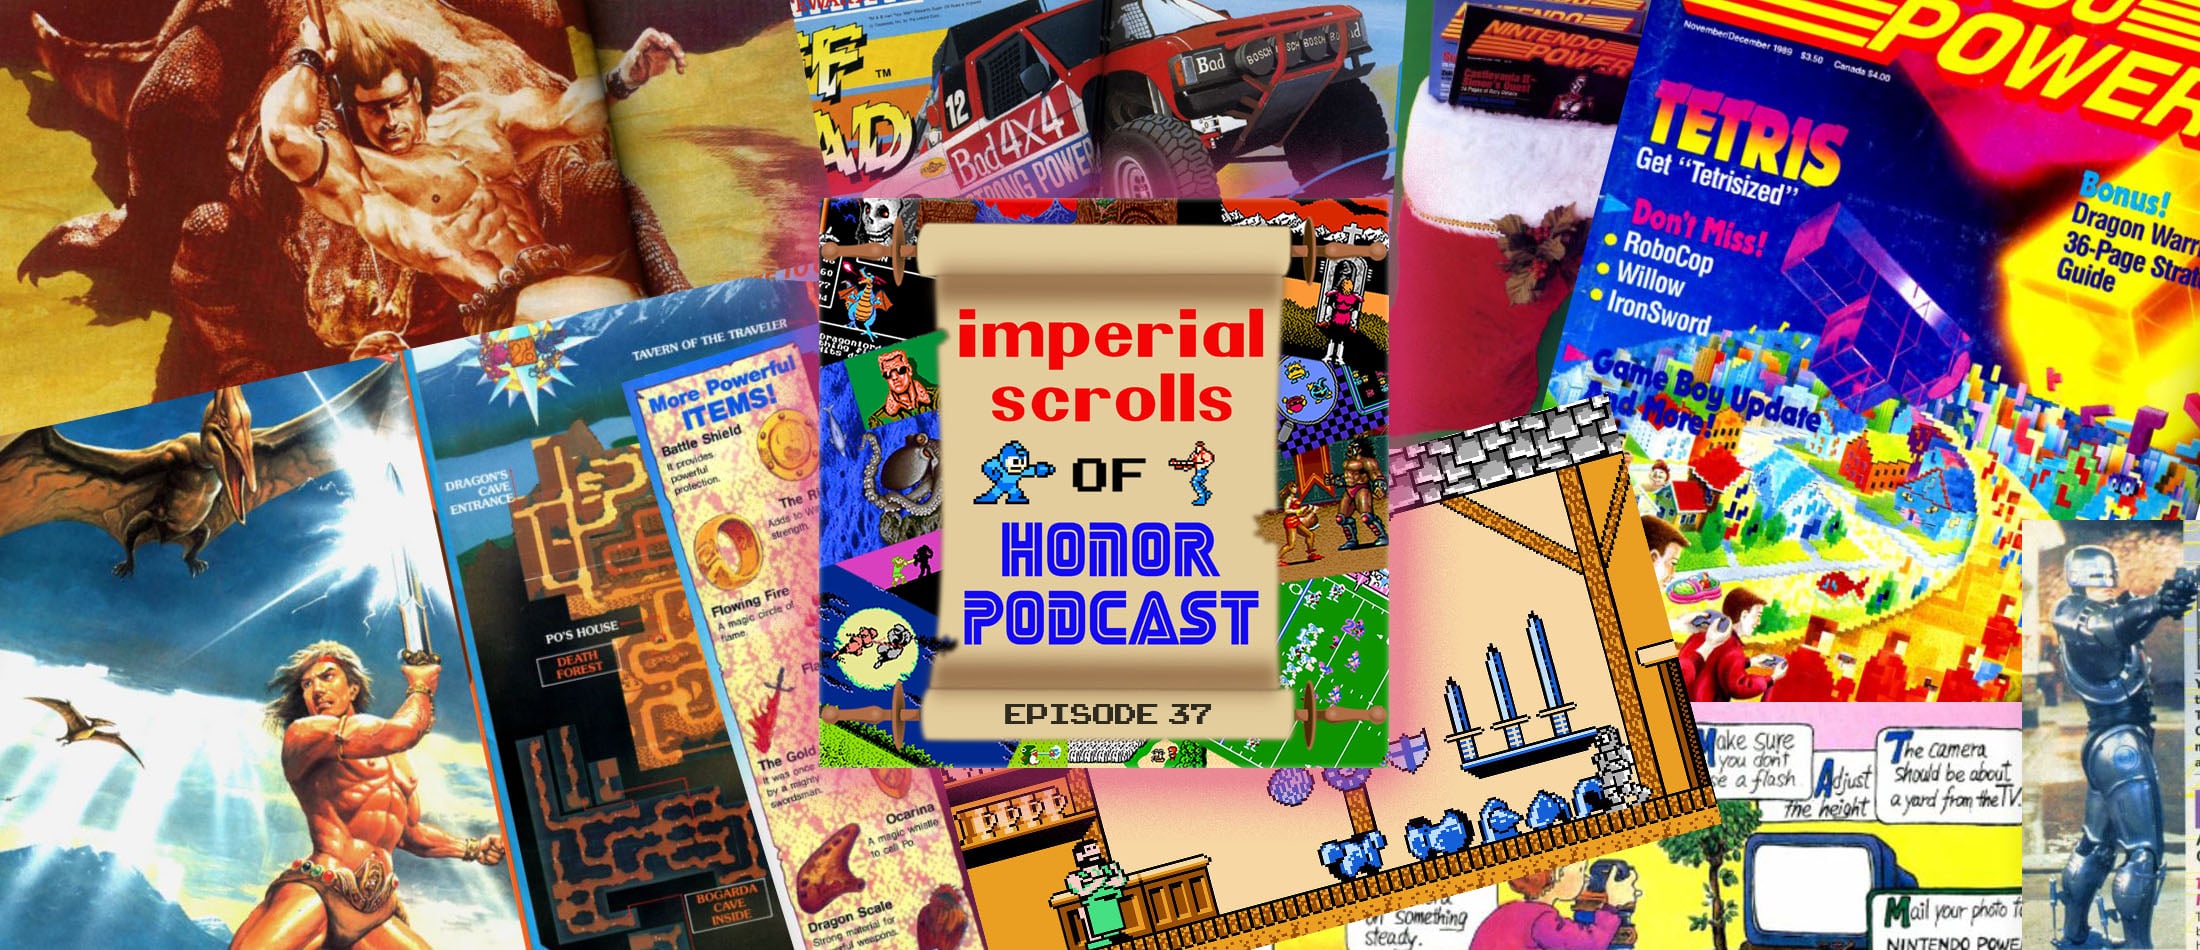 Imperial Scrolls of Honor Podcast - Episode 37 - Nintendo Power #9